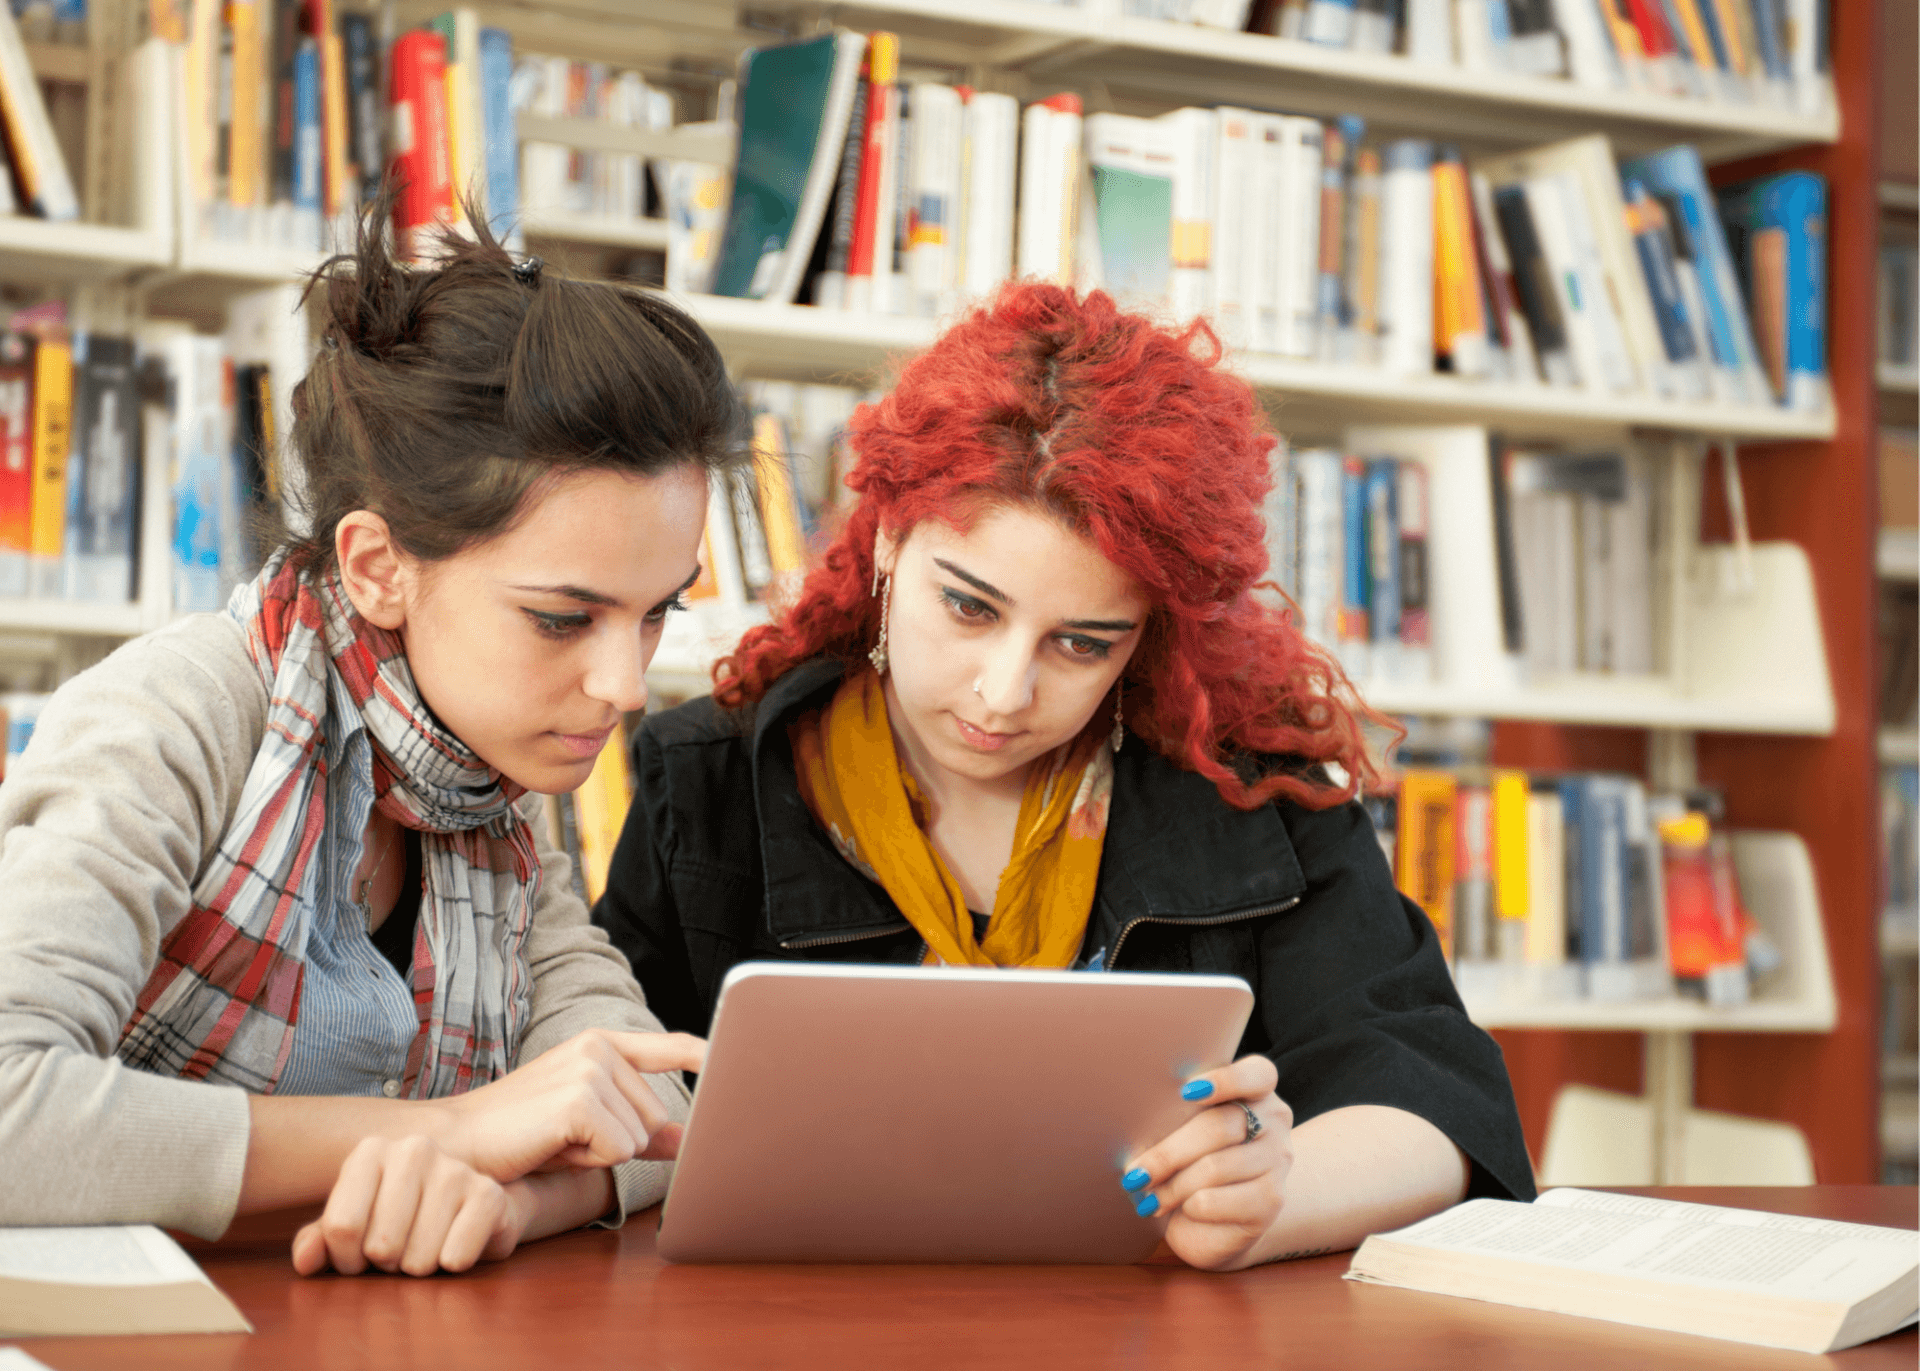 Two students look at tablet in a library.